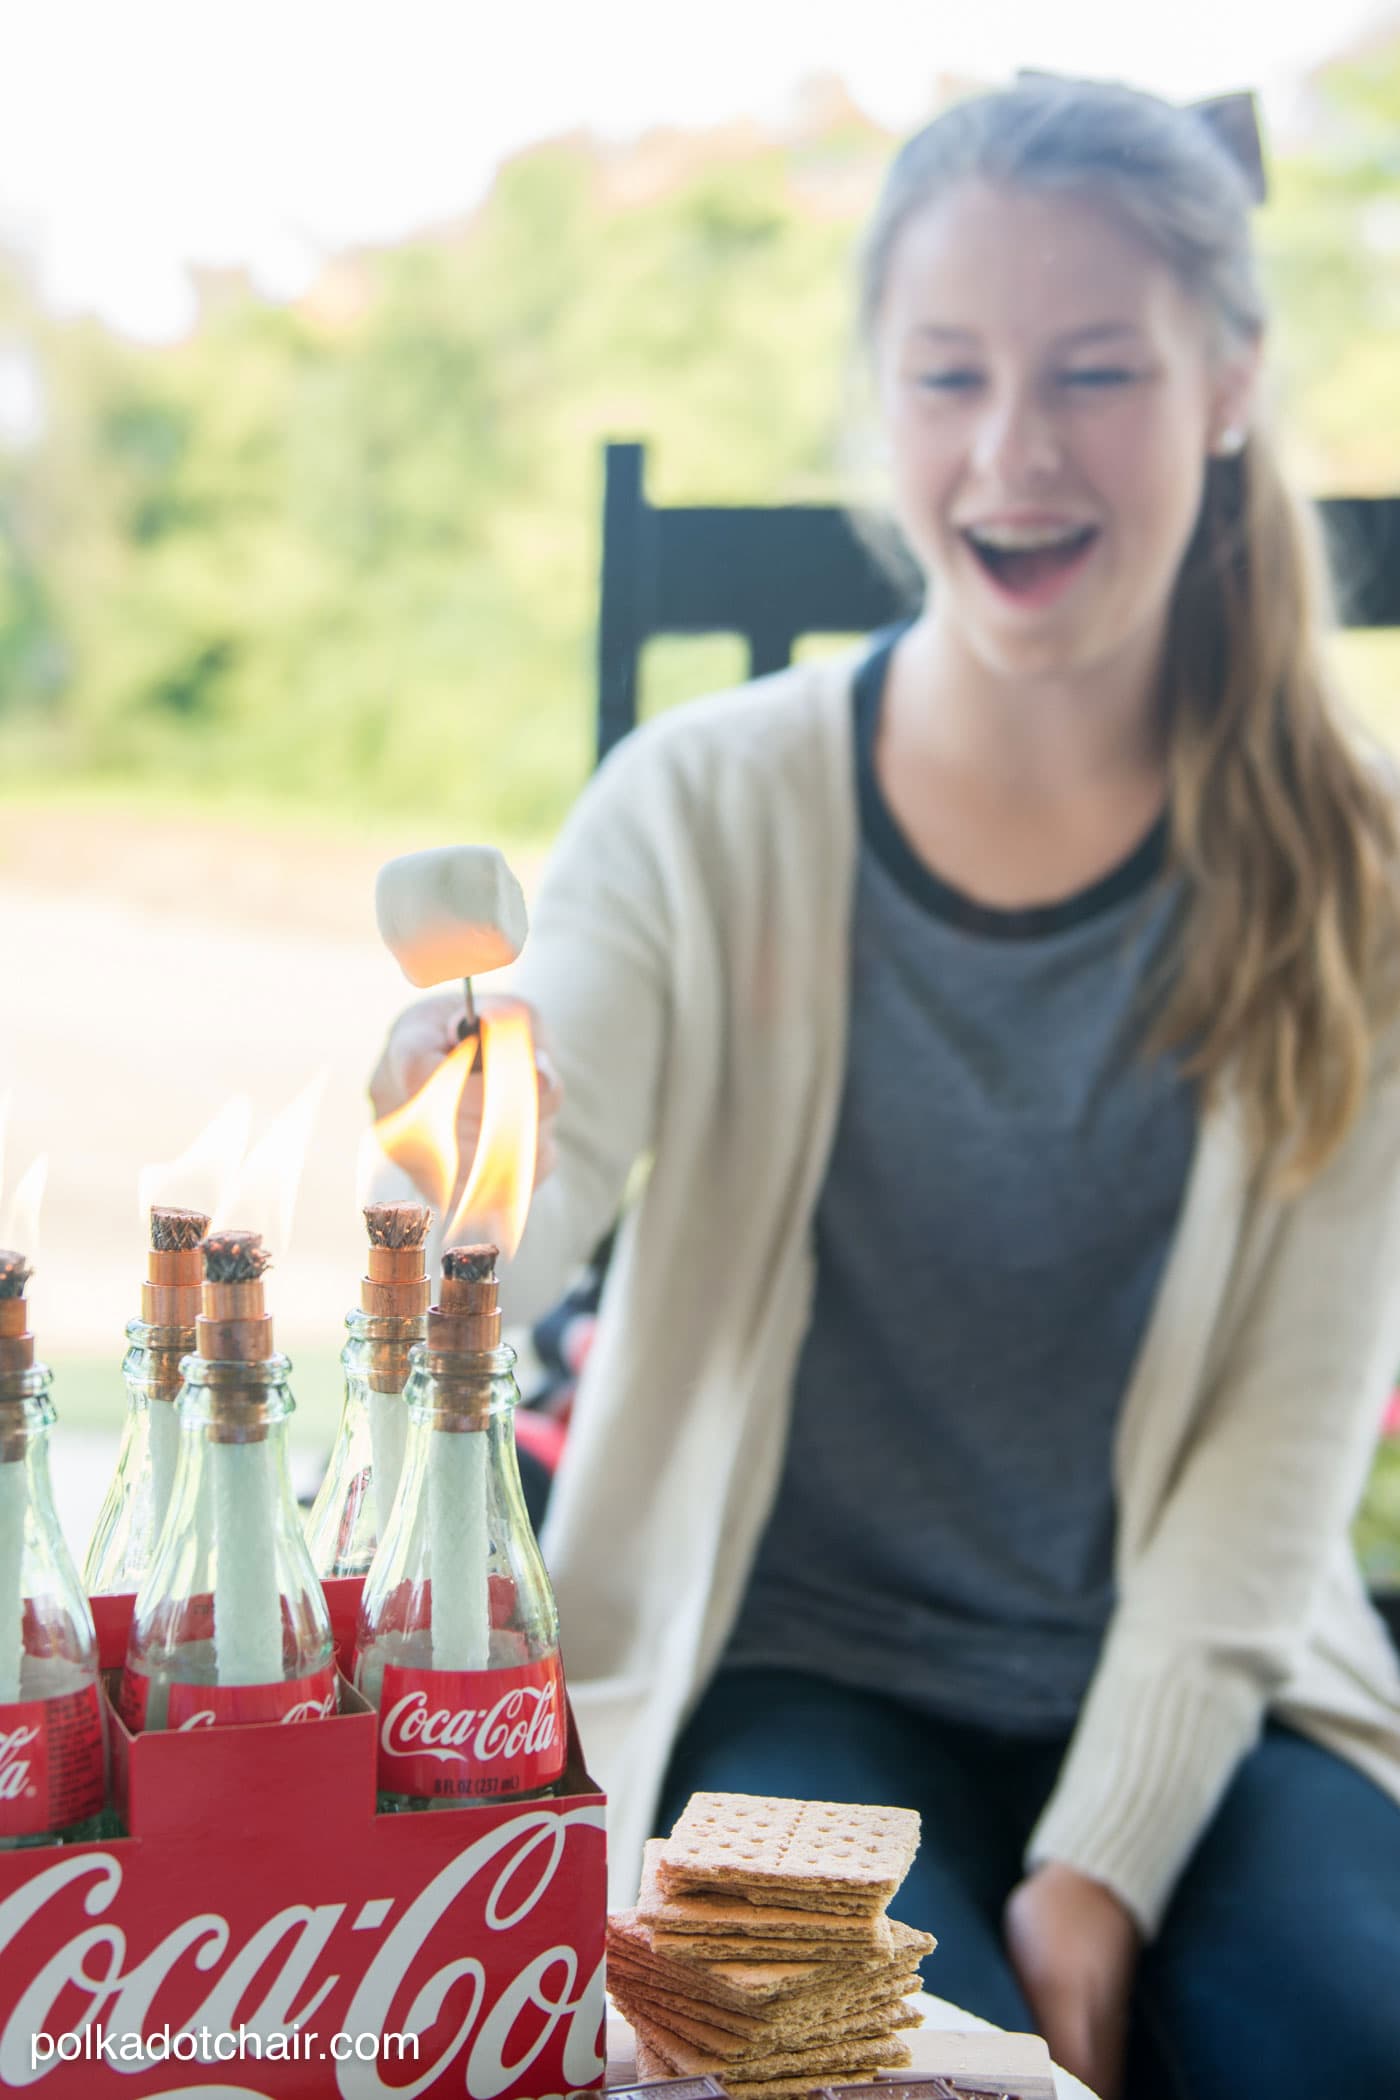 DIY tabletop s'mores maker made from upcycled Coca-Cola bottles